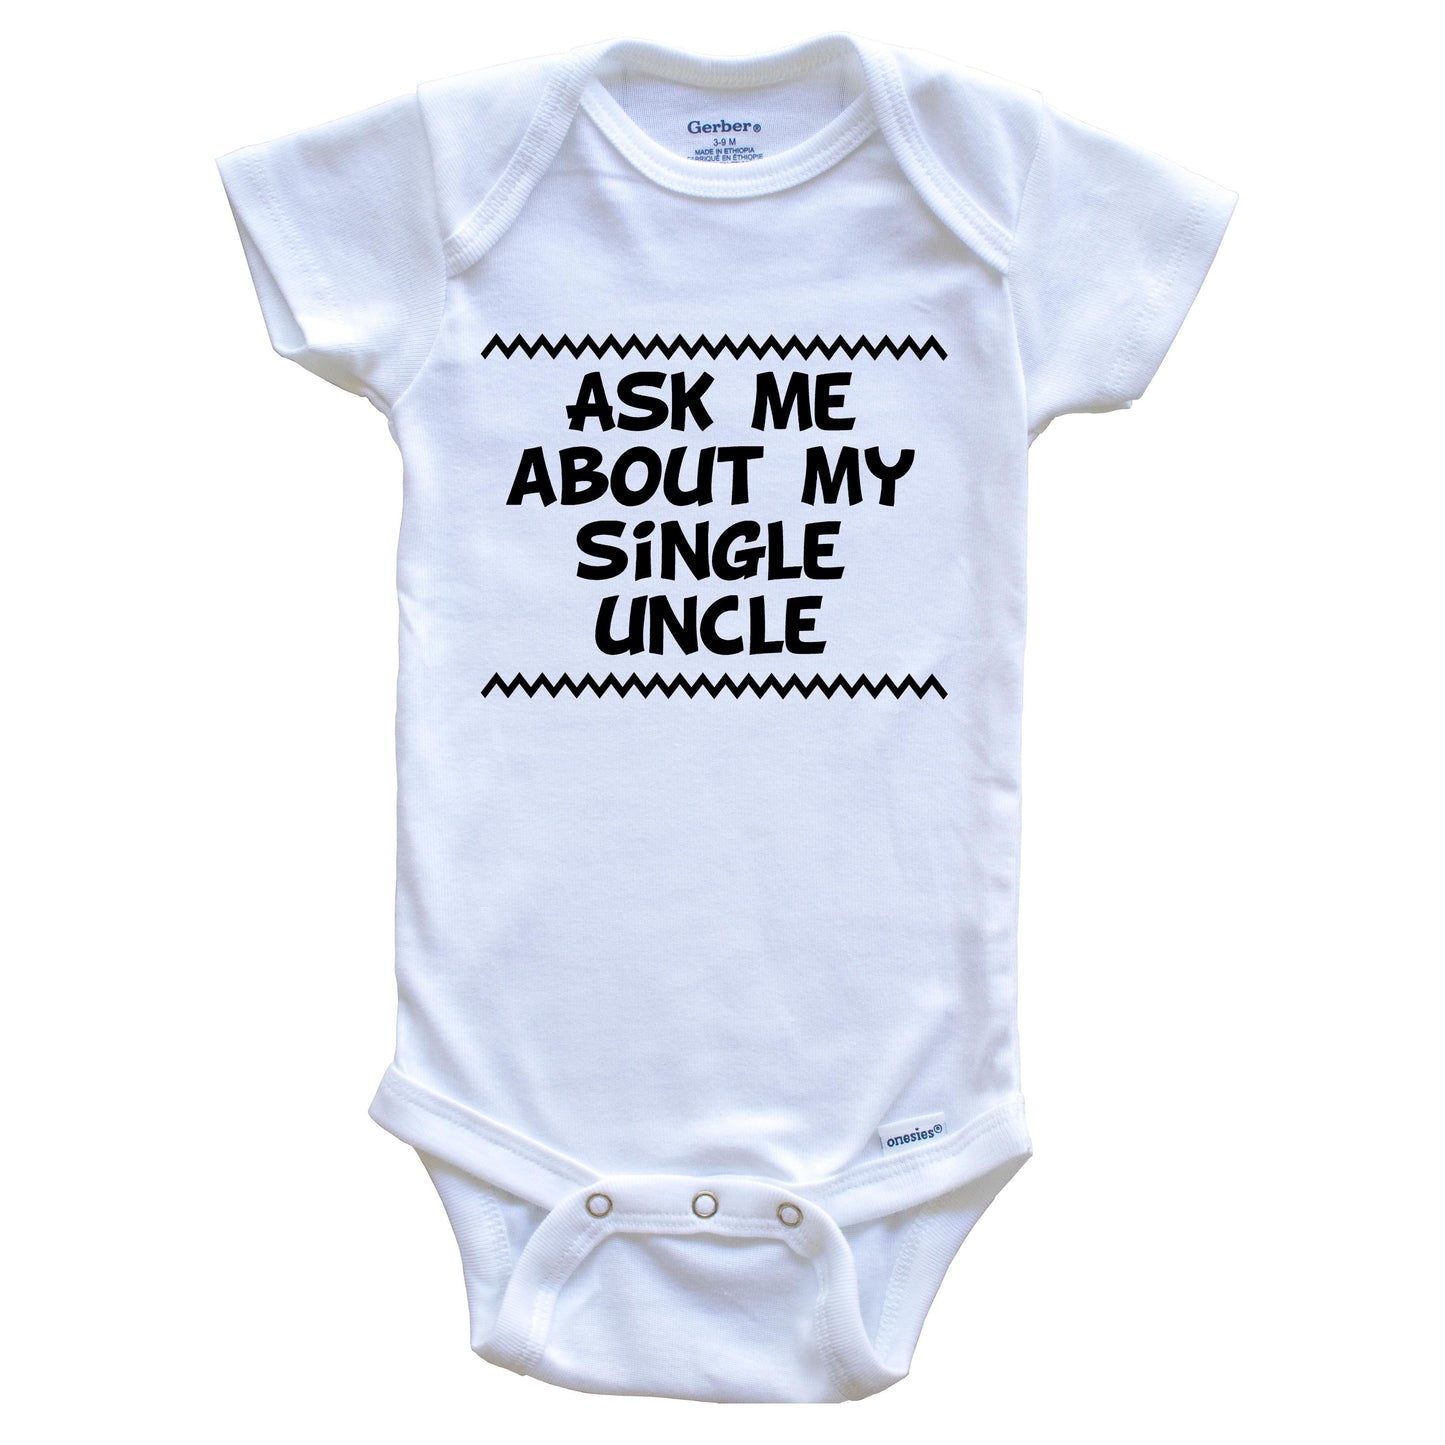 Ask Me About My Single Uncle Funny Baby Onesie - One Piece Baby Bodysuit